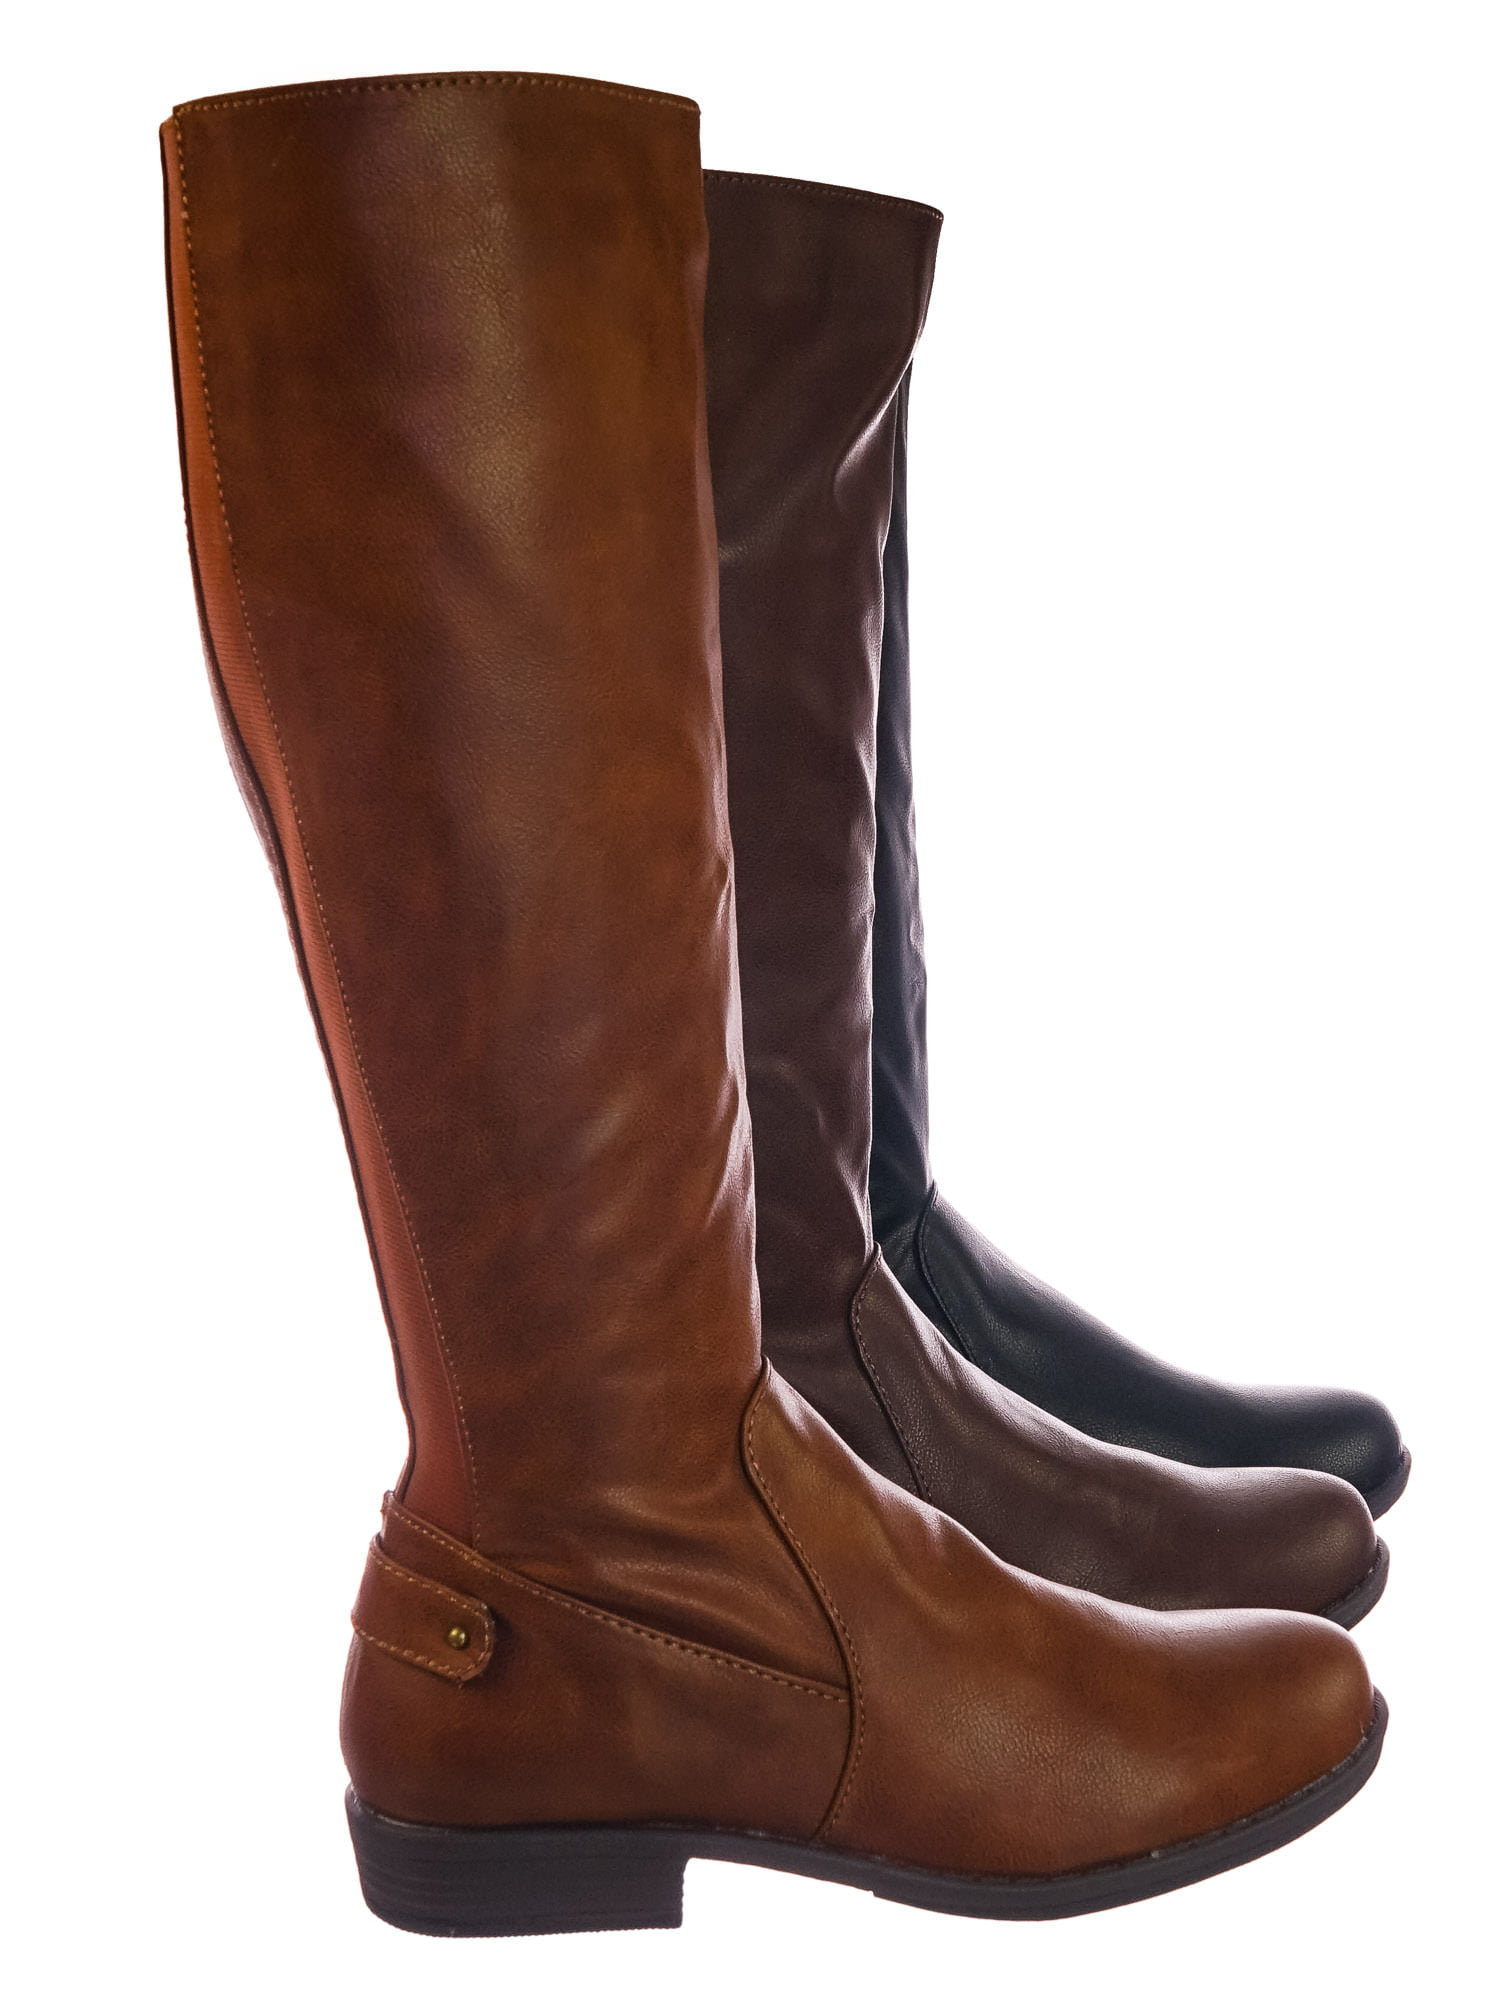 Montage77 F-Leathe Equestrian Winter Warm Fur-Lined Elastic Riding Boots 